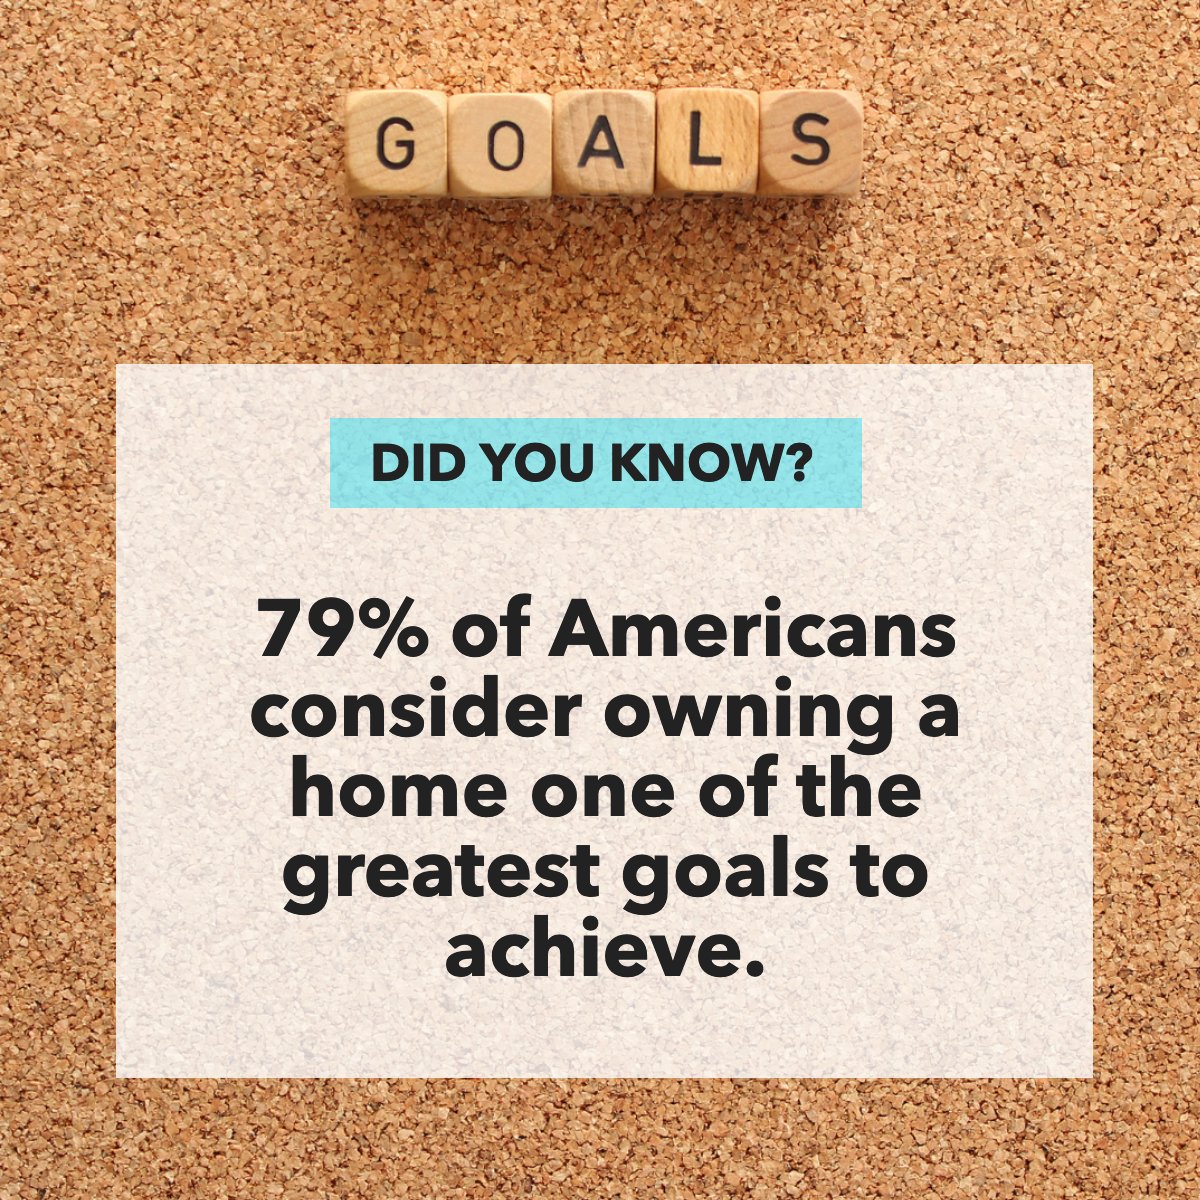 Is this one of your Goals? 🤔 I think most people can identify with this goal! #realestatefacts #homeowner #facts #goals